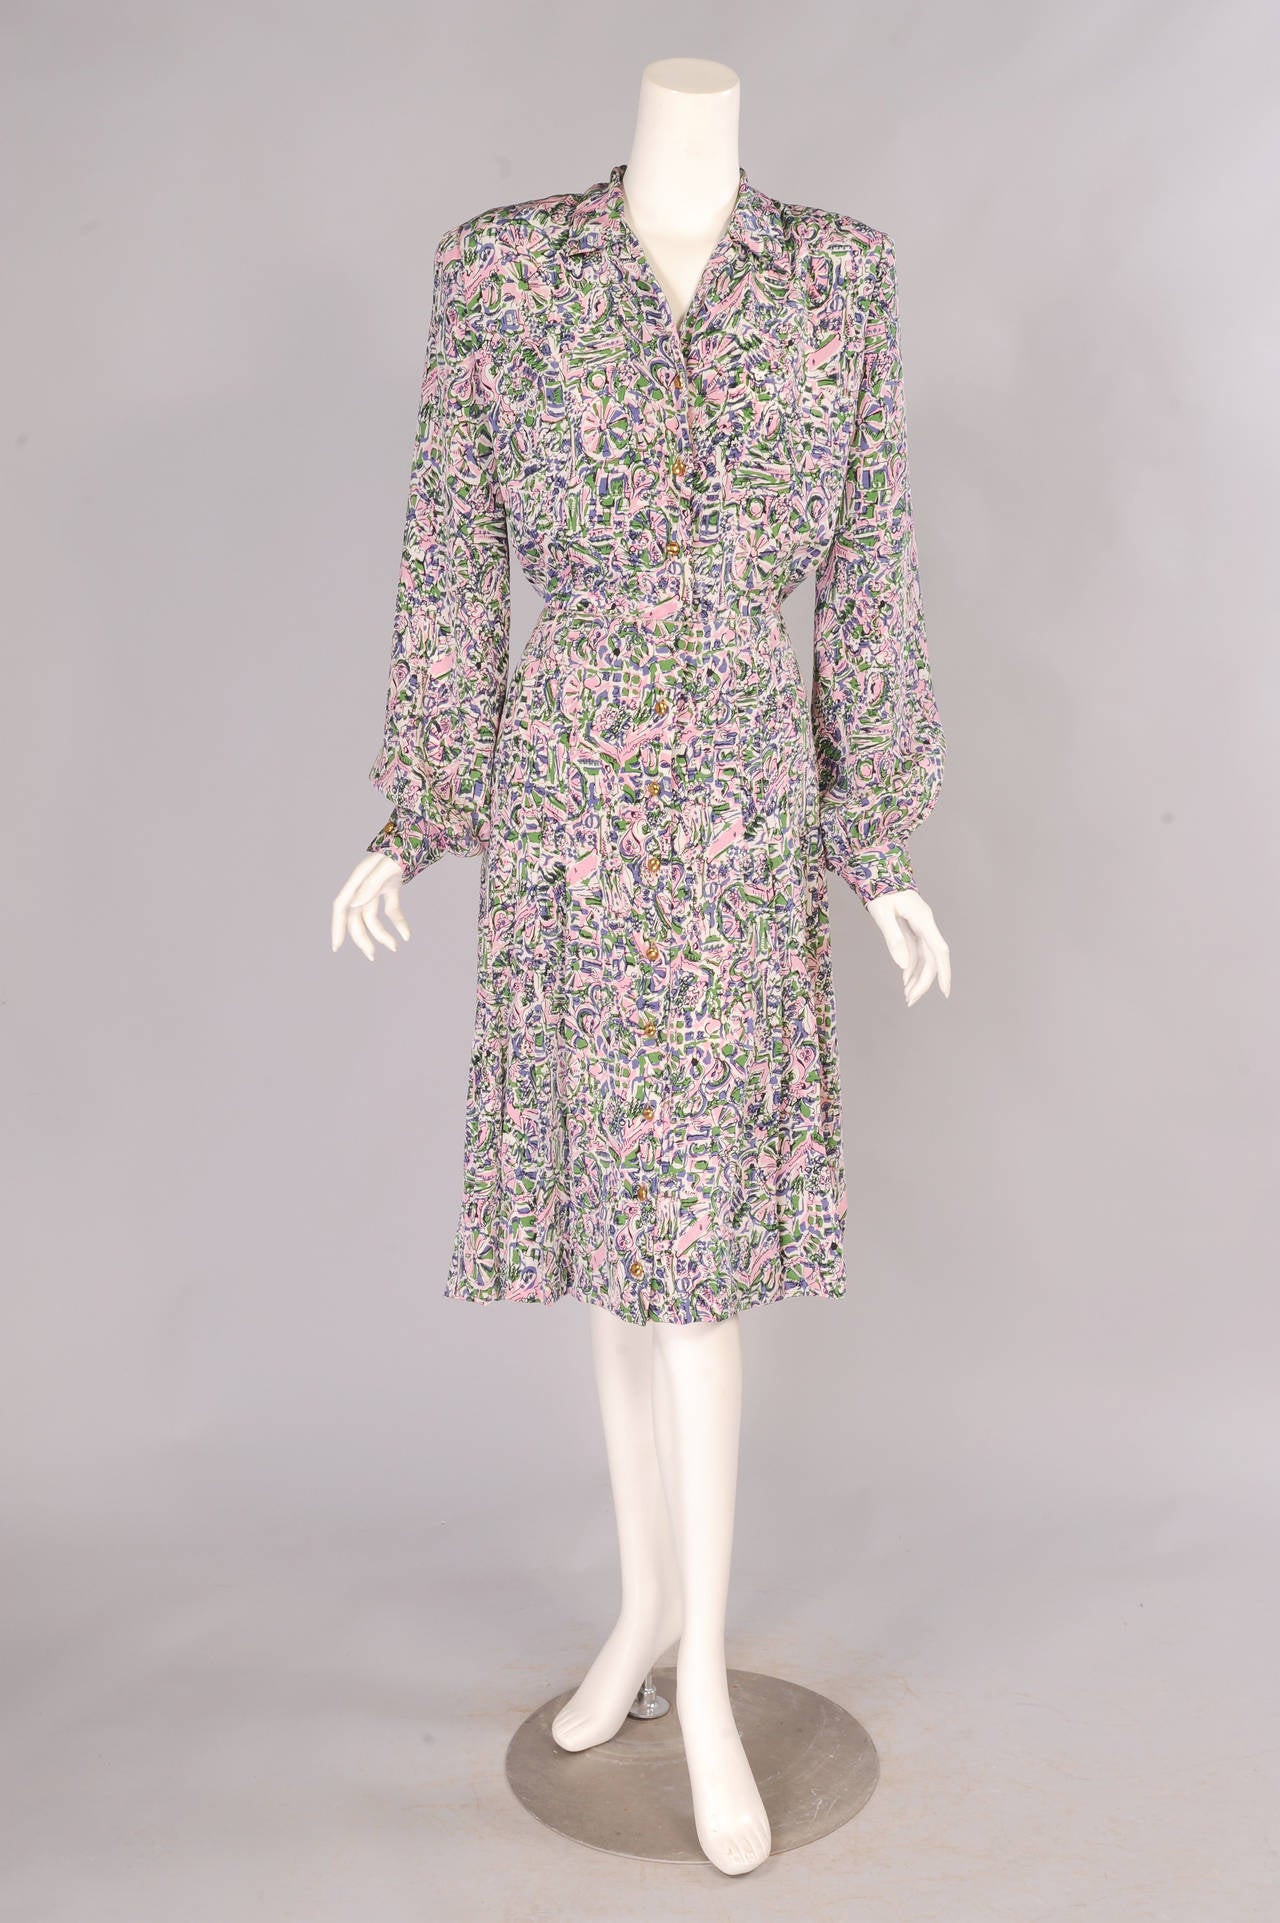 An abstract print in pink, green and lavender is used for this 1940's silk day dress. There is a row of gold toned buttons all the way down the front of the dress. The cuffs have matching buttons. The skirt has stitched down pleats over the hips and